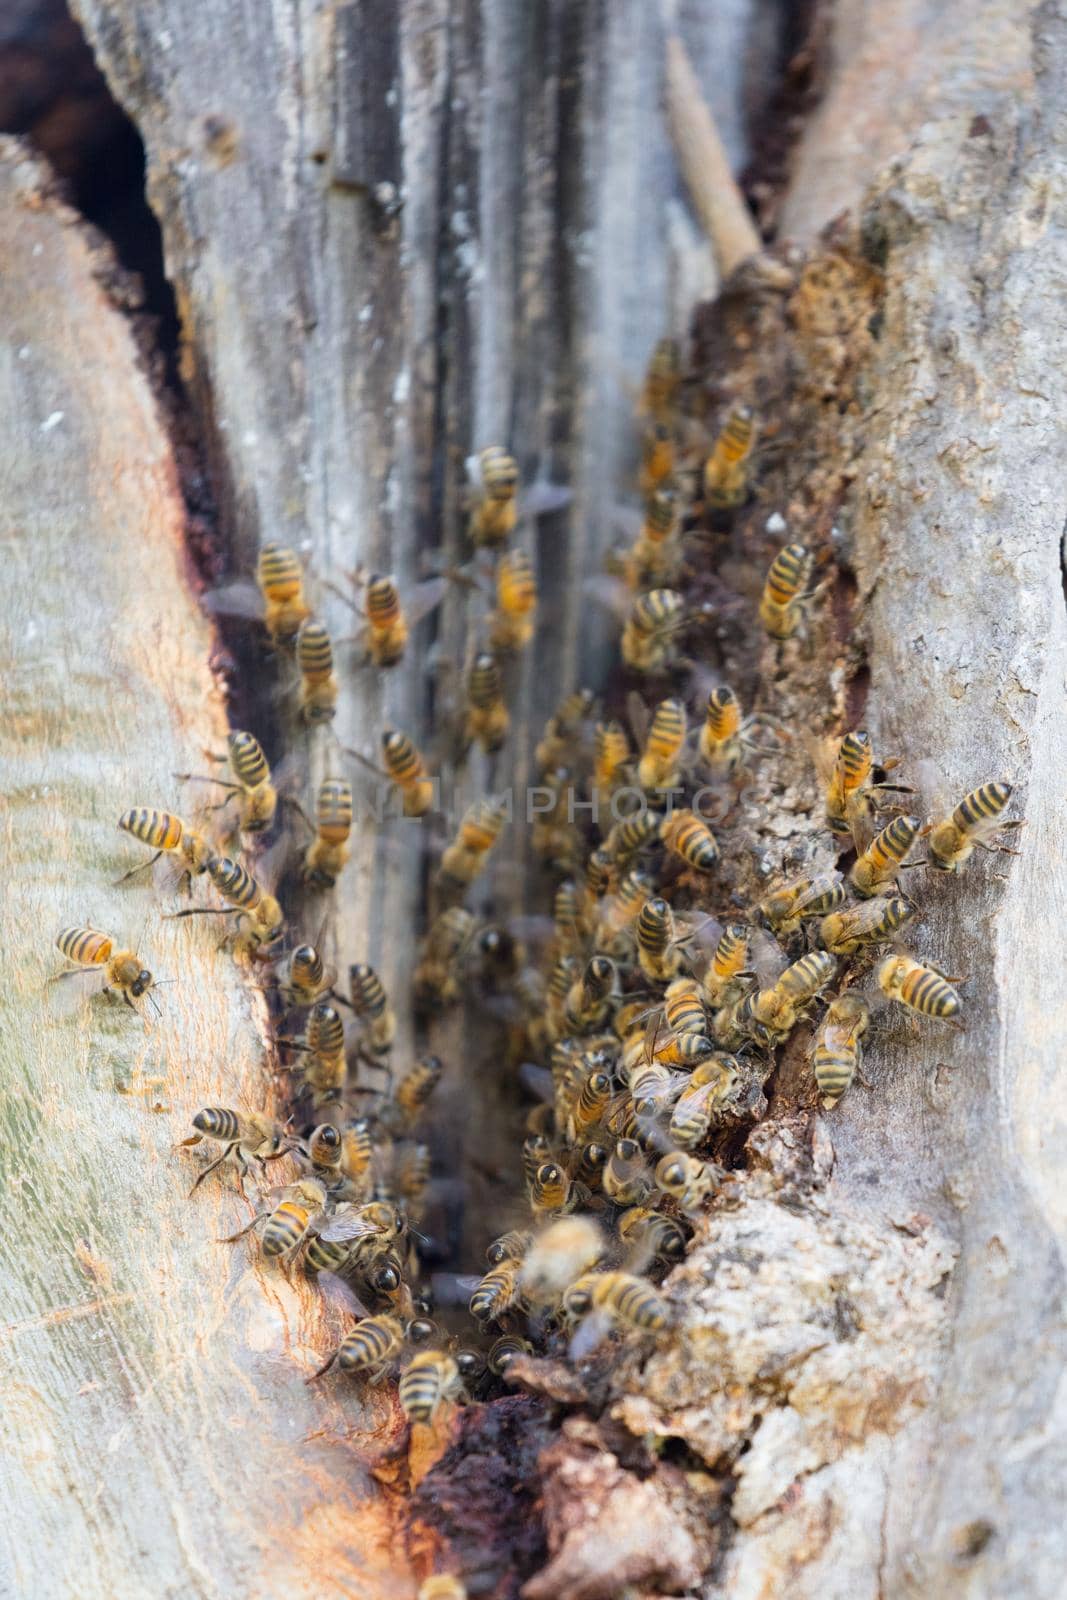 Group of Bees in Australia by FiledIMAGE